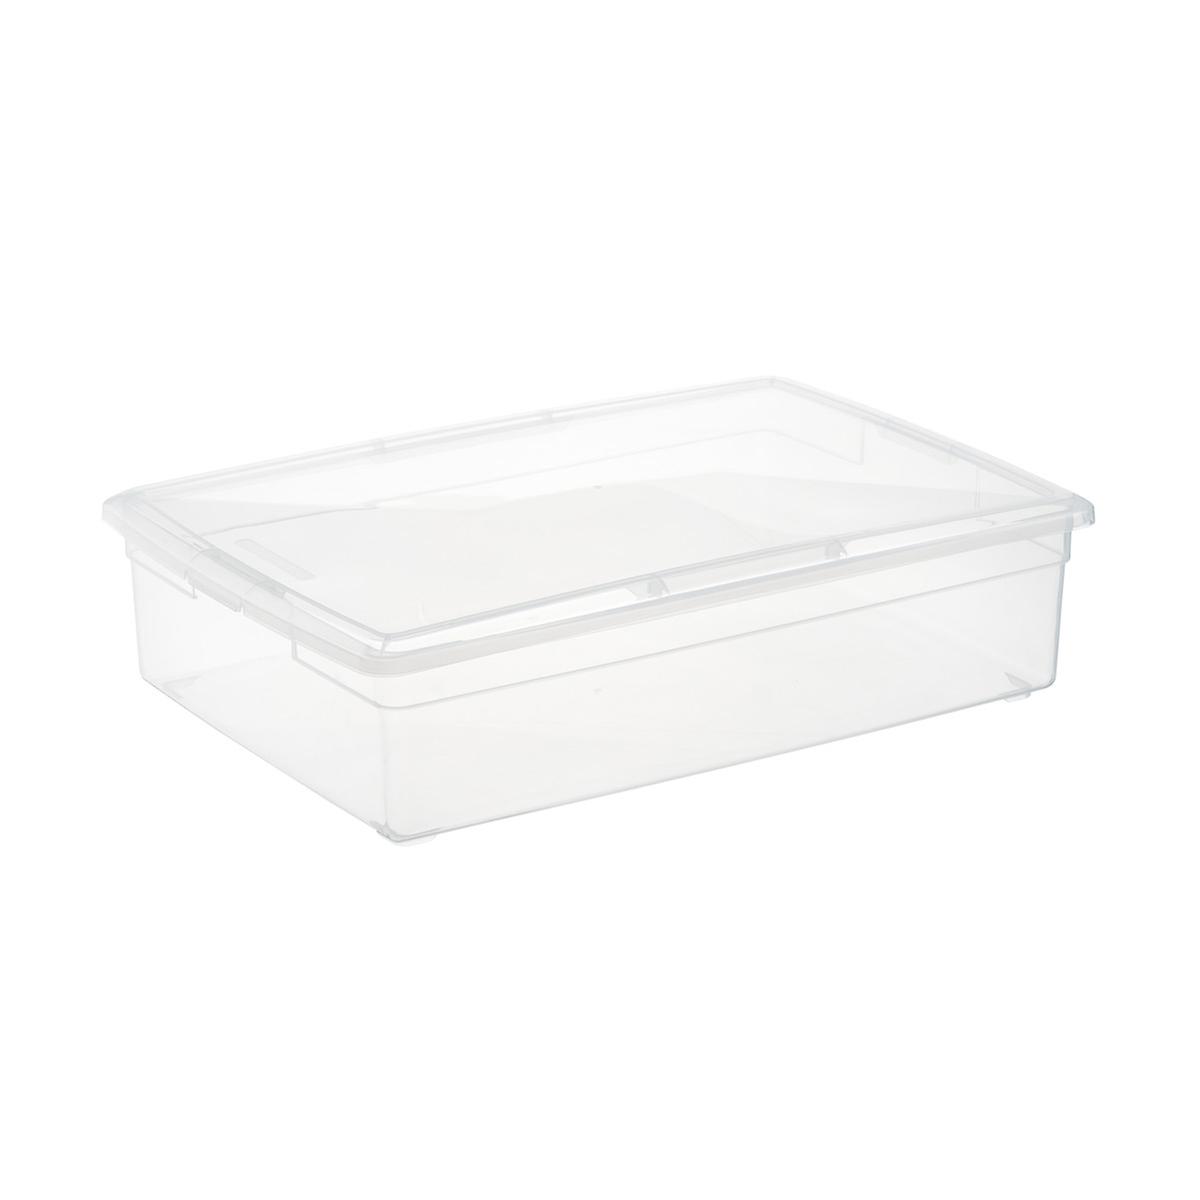 Our Clear Storage Boxes The Container, Bin Box Shelving